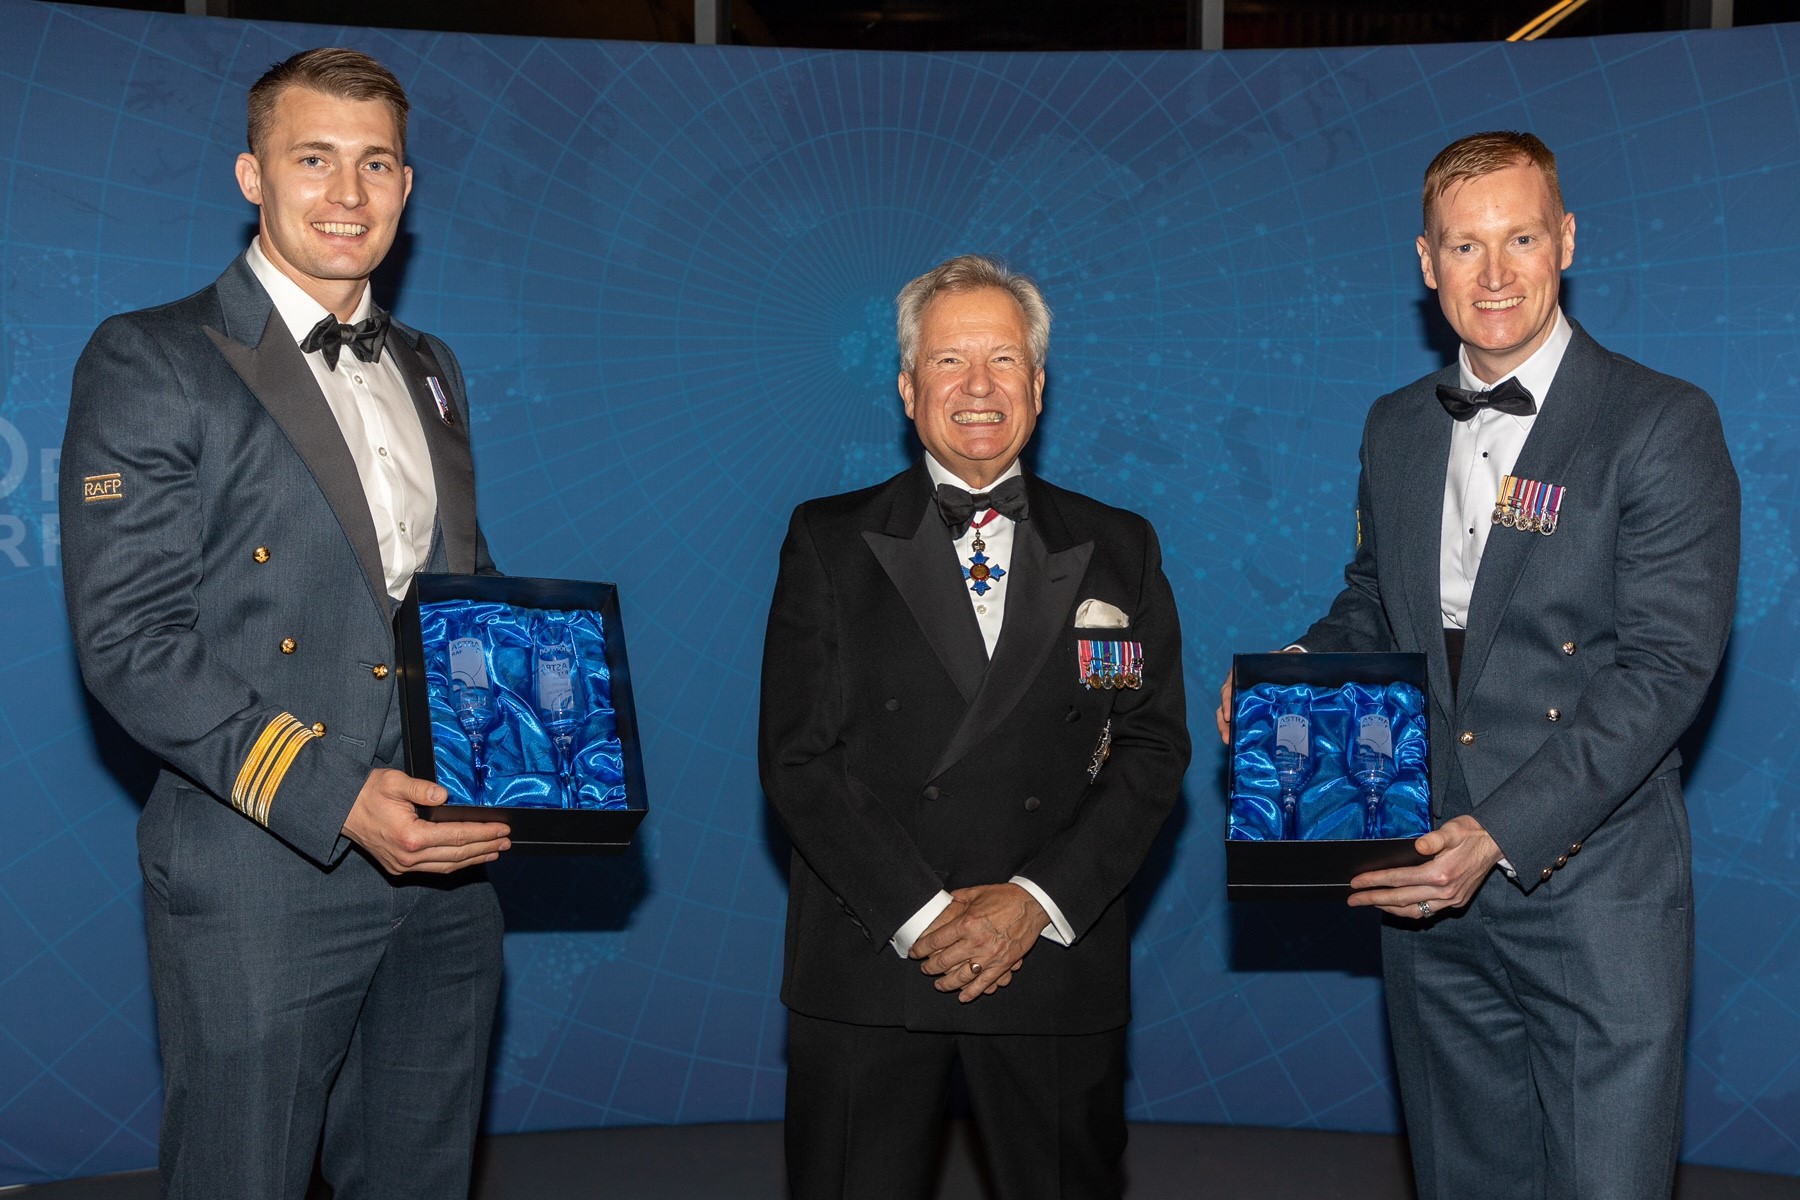 Image shows RAF aviators holding awards for picture at awards ceremony.